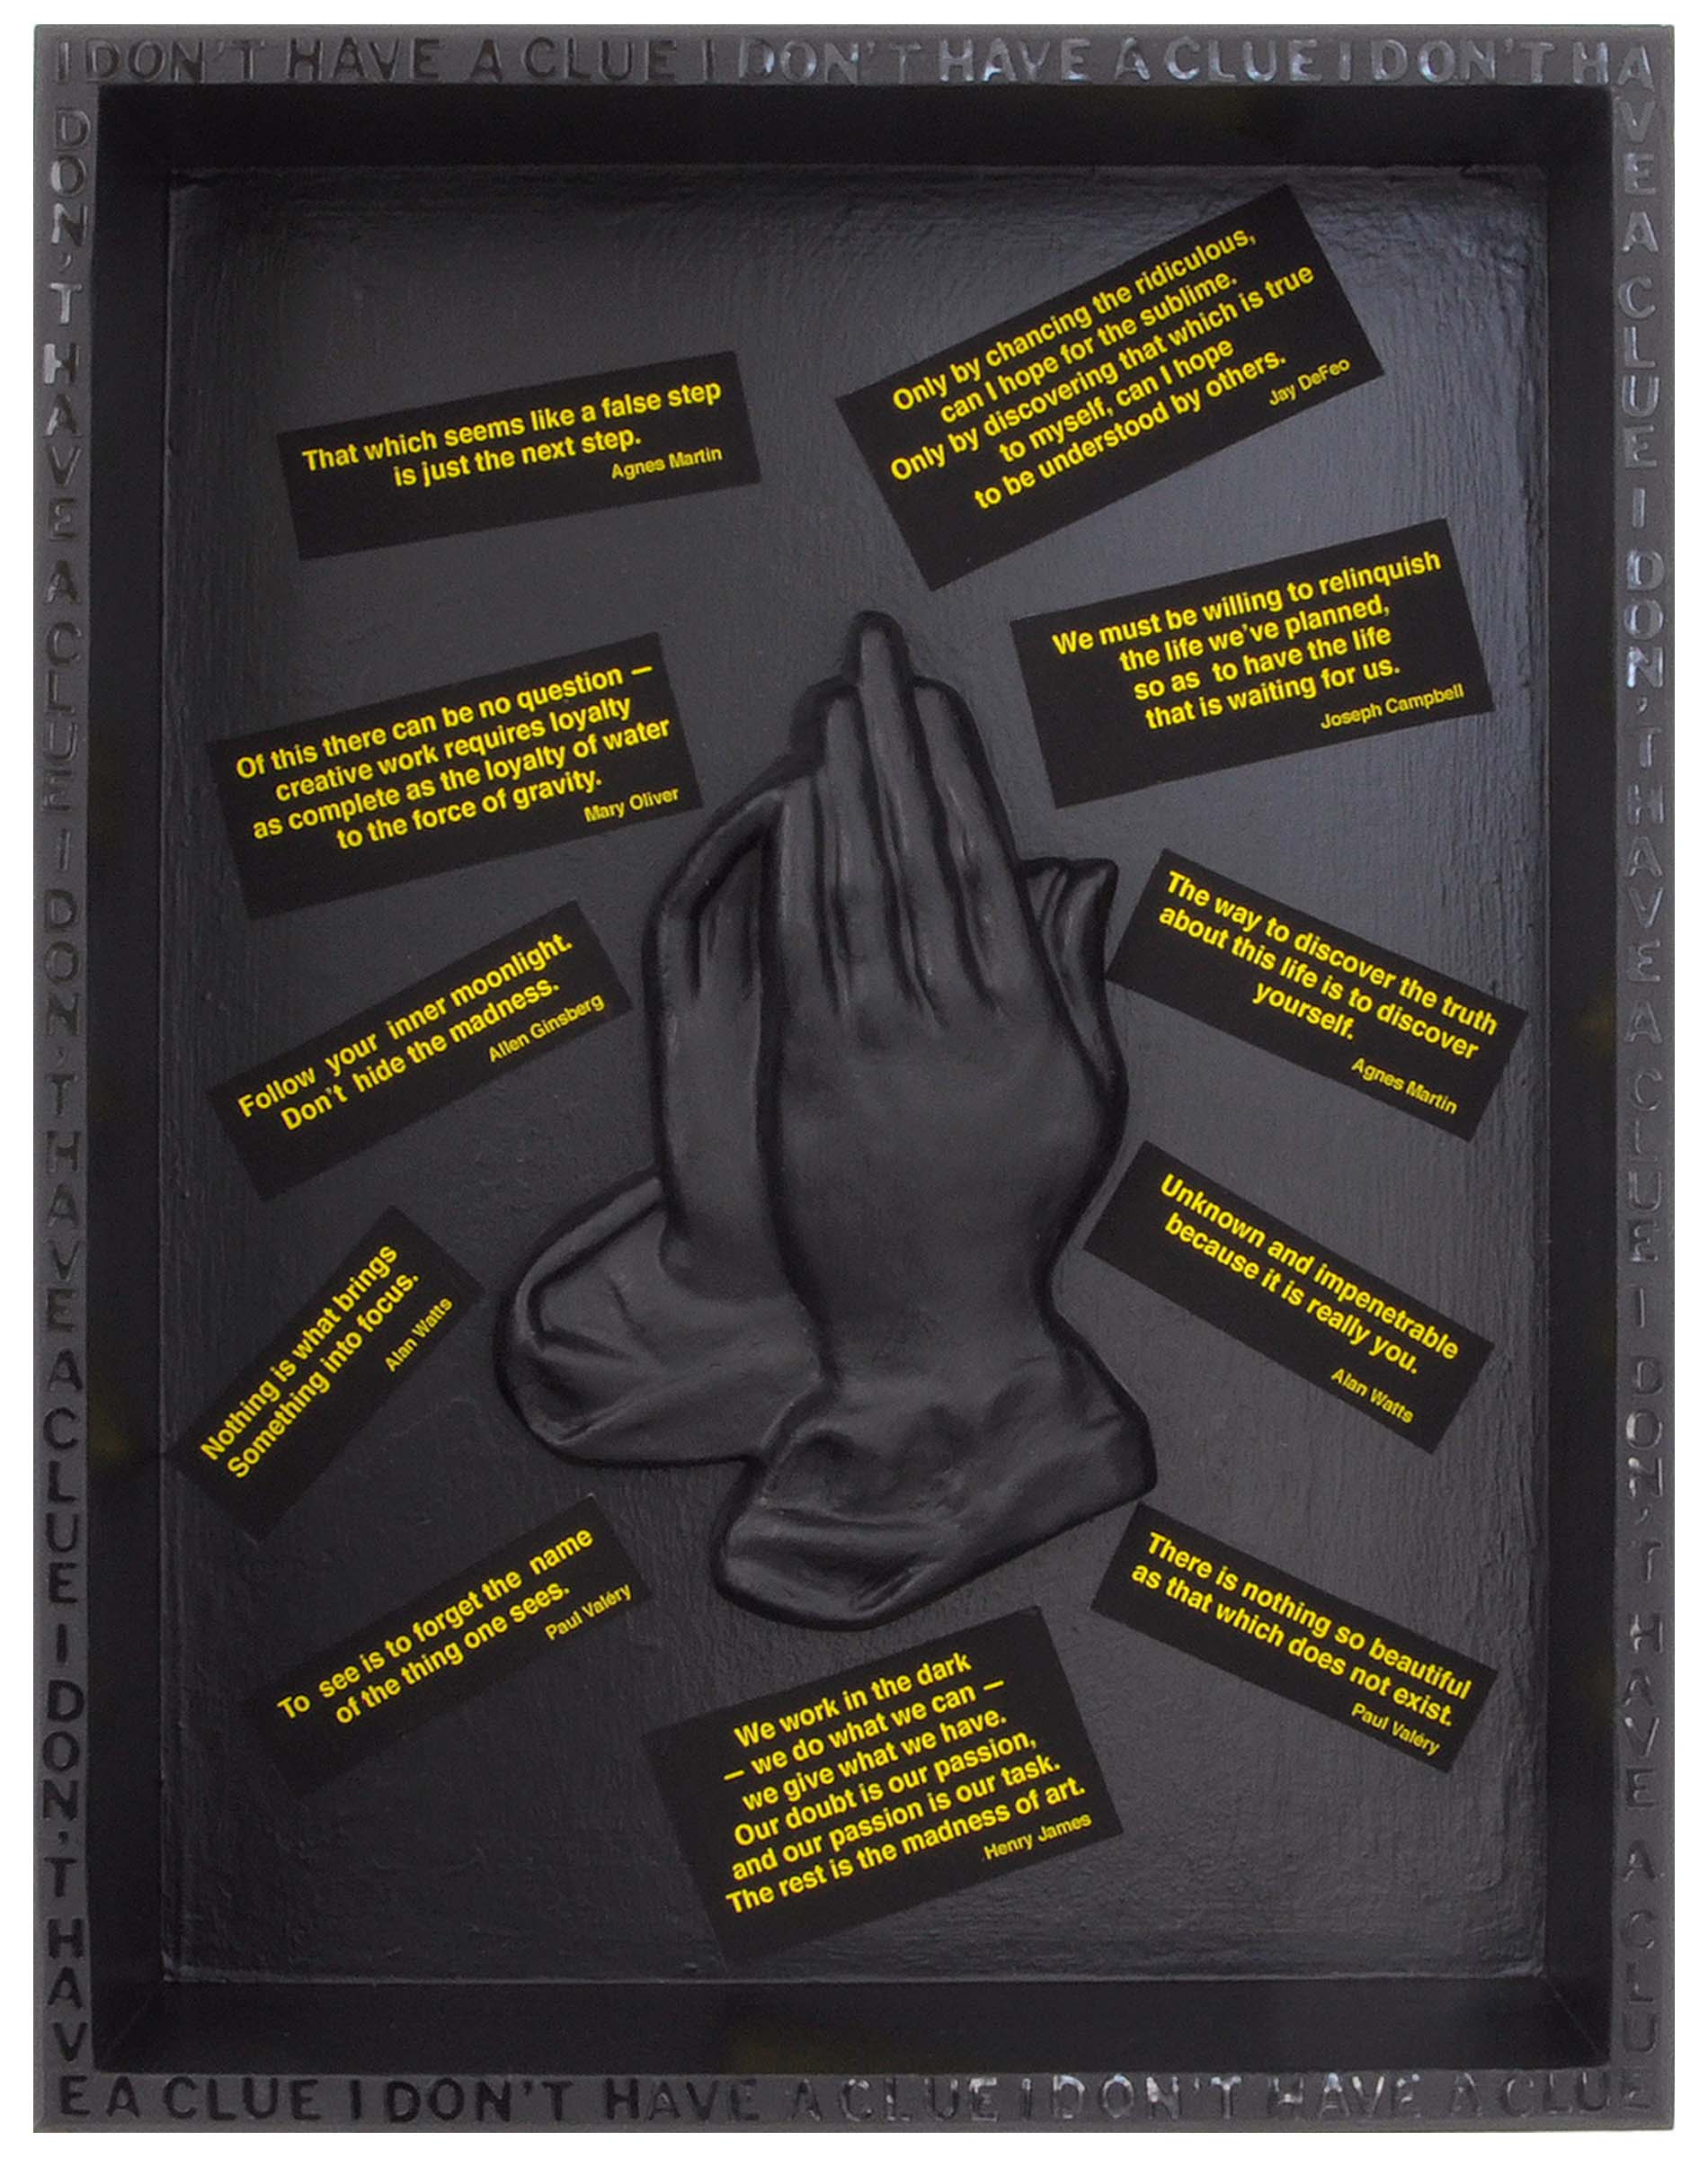 Two hands together in prayer position with black boxes with yellow text surrounding the hands